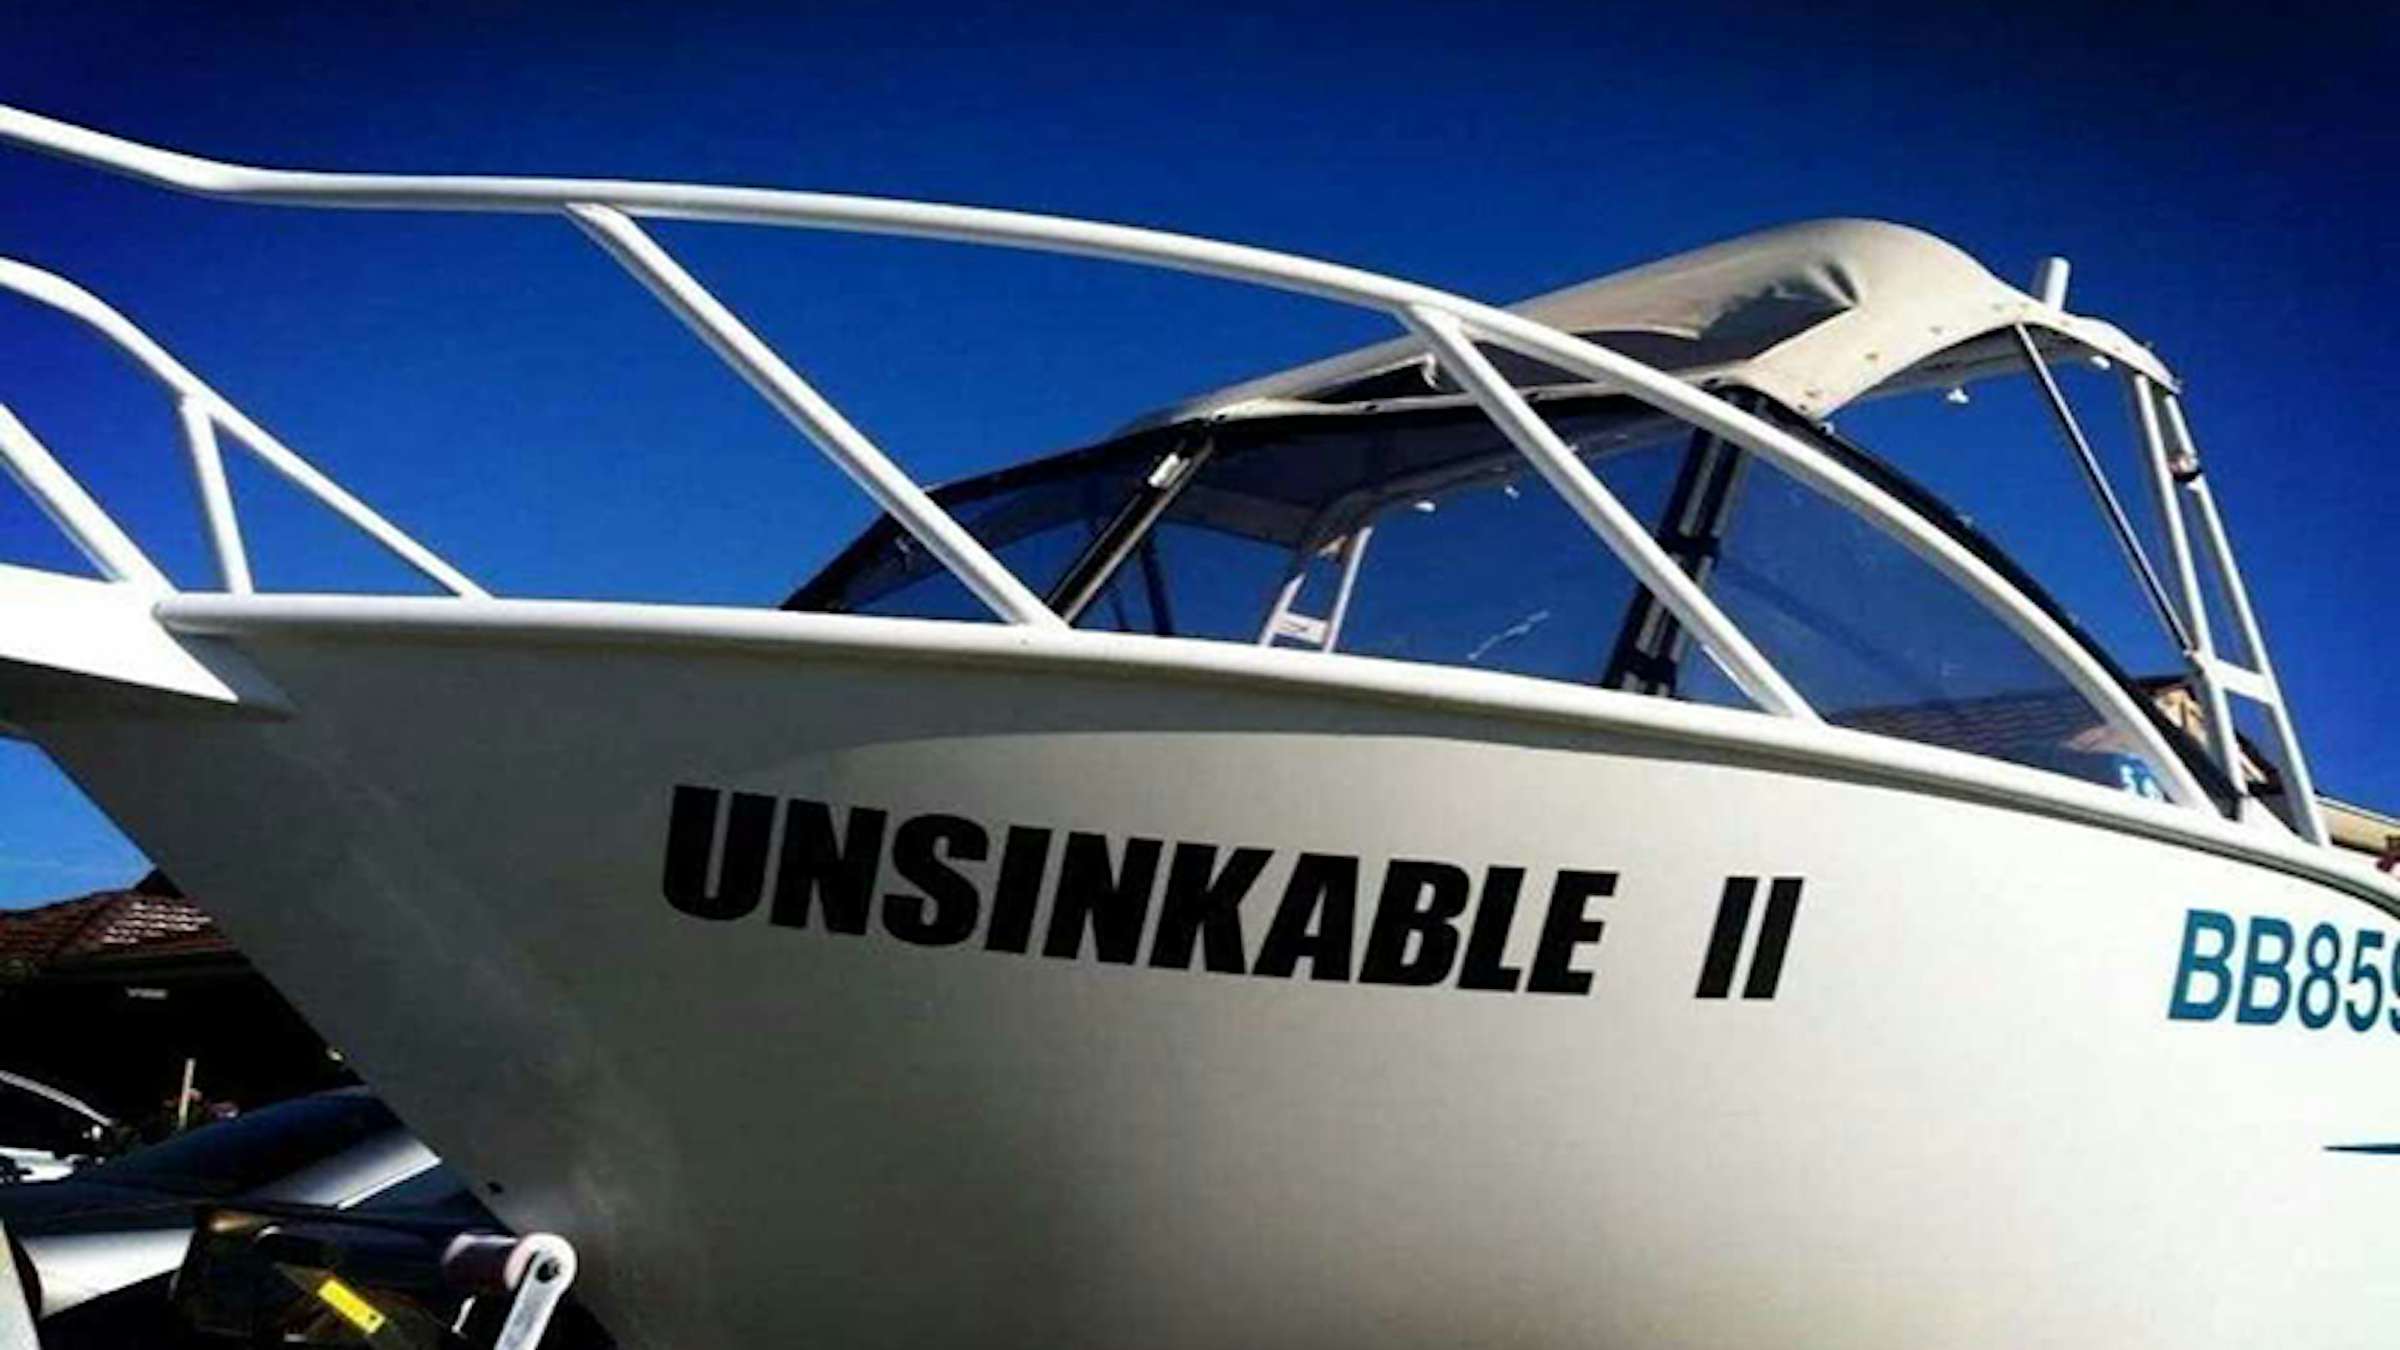 Getting your boat name right